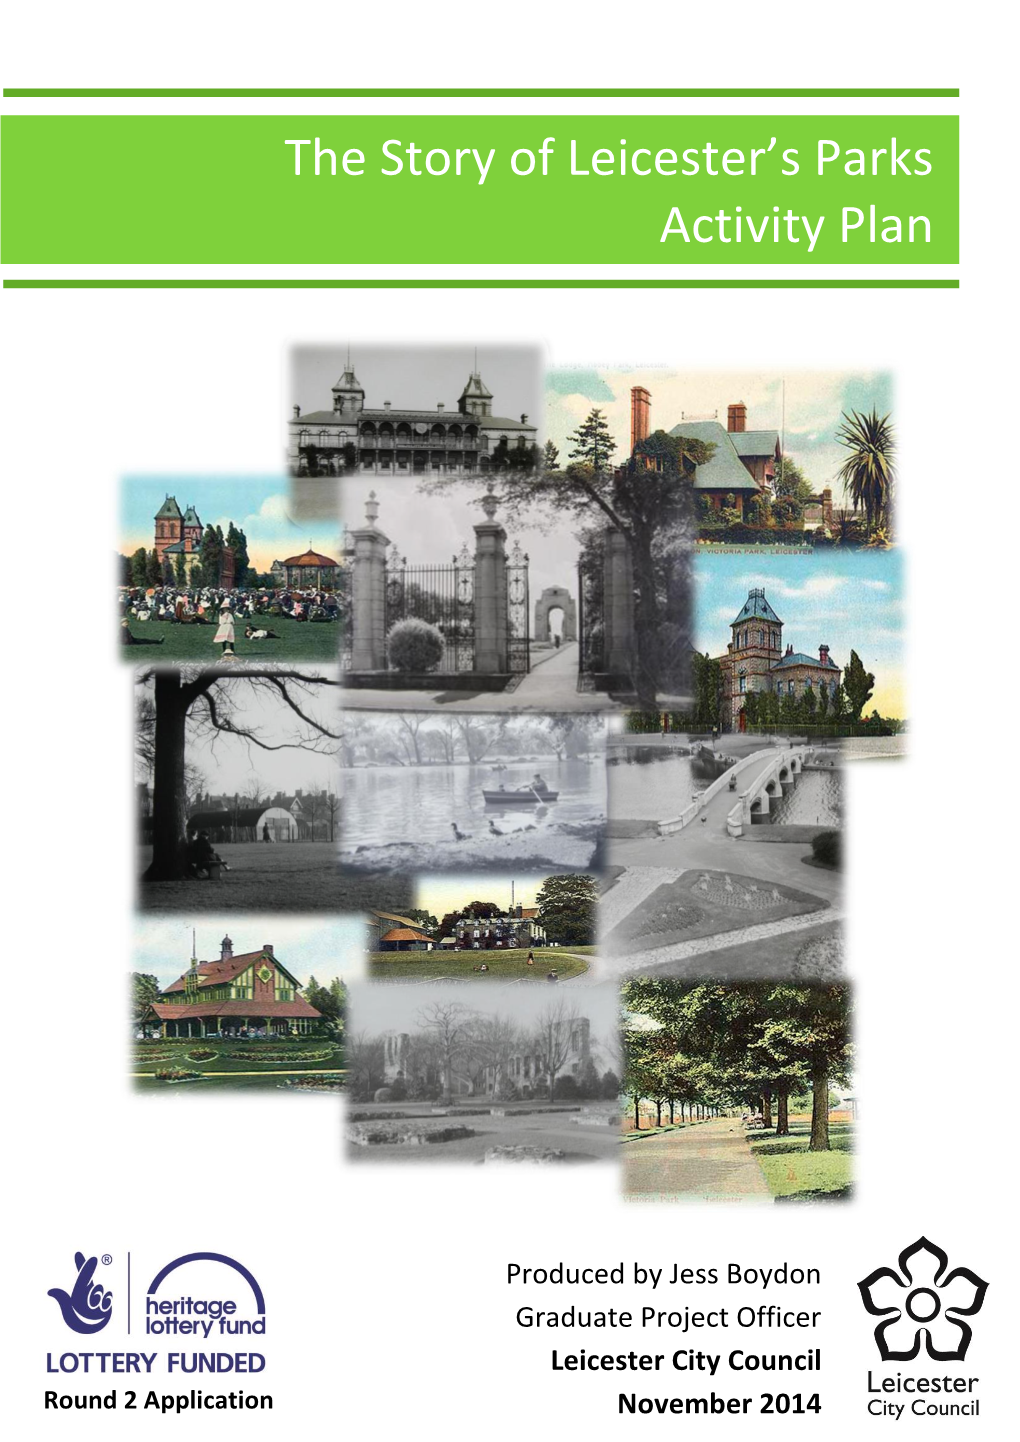 The Story of Leicester's Parks Activity Plan